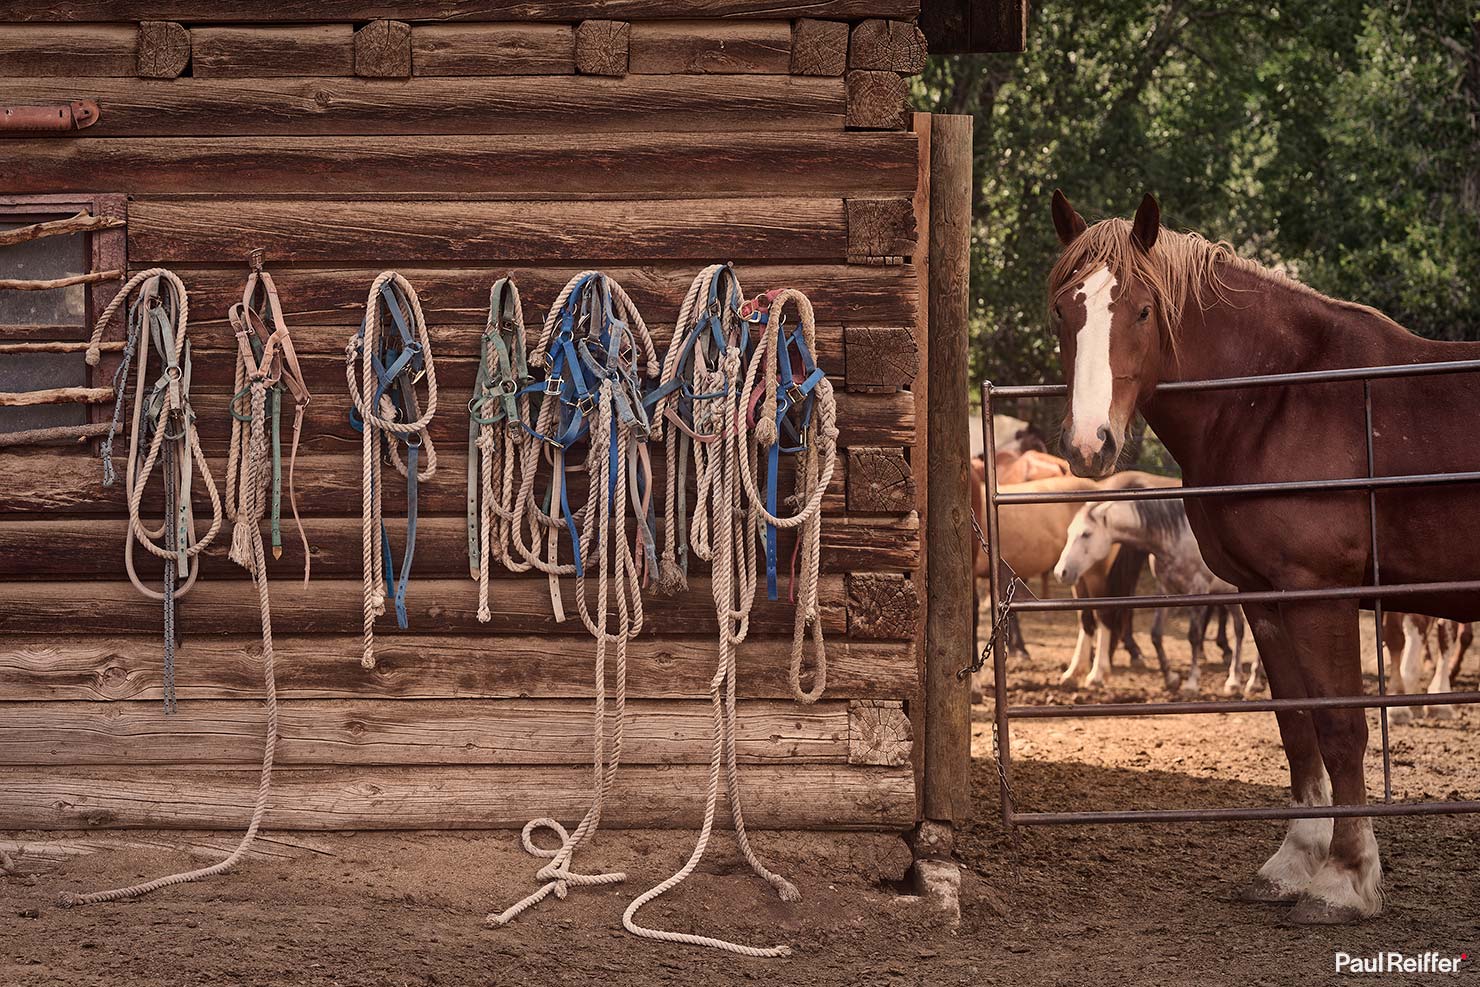 Bitterroot Tied Up Horse Gate Ropes Tack Barn Corral Mountains Paul Reiffer Wyoming Ranch US West Cowboy Horses Fox Family Photographs Dubois Jackson WY